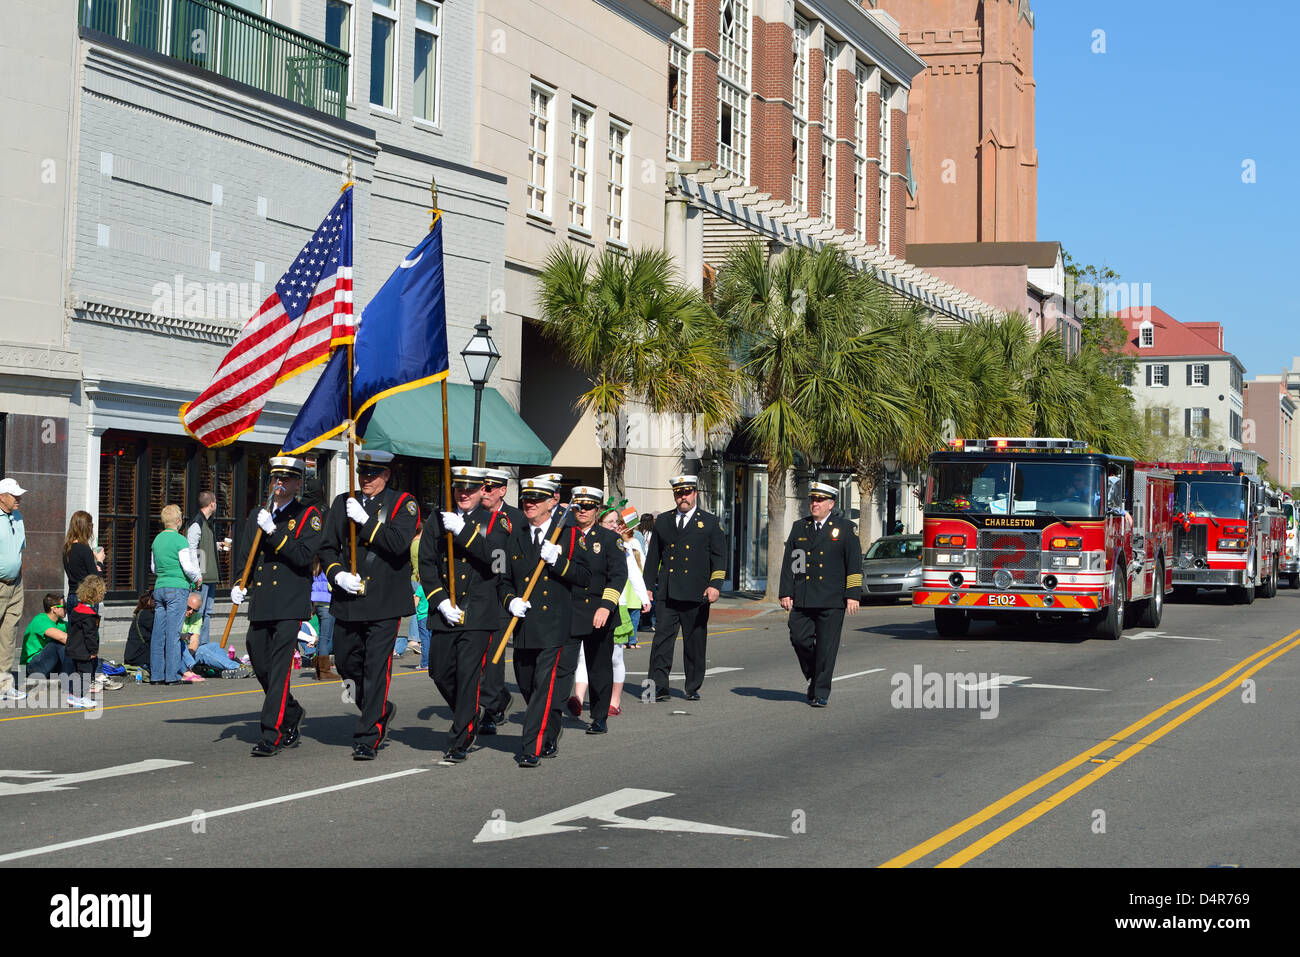 Fire Department color guard parading in St. Patrick's Day parade Stock Photo